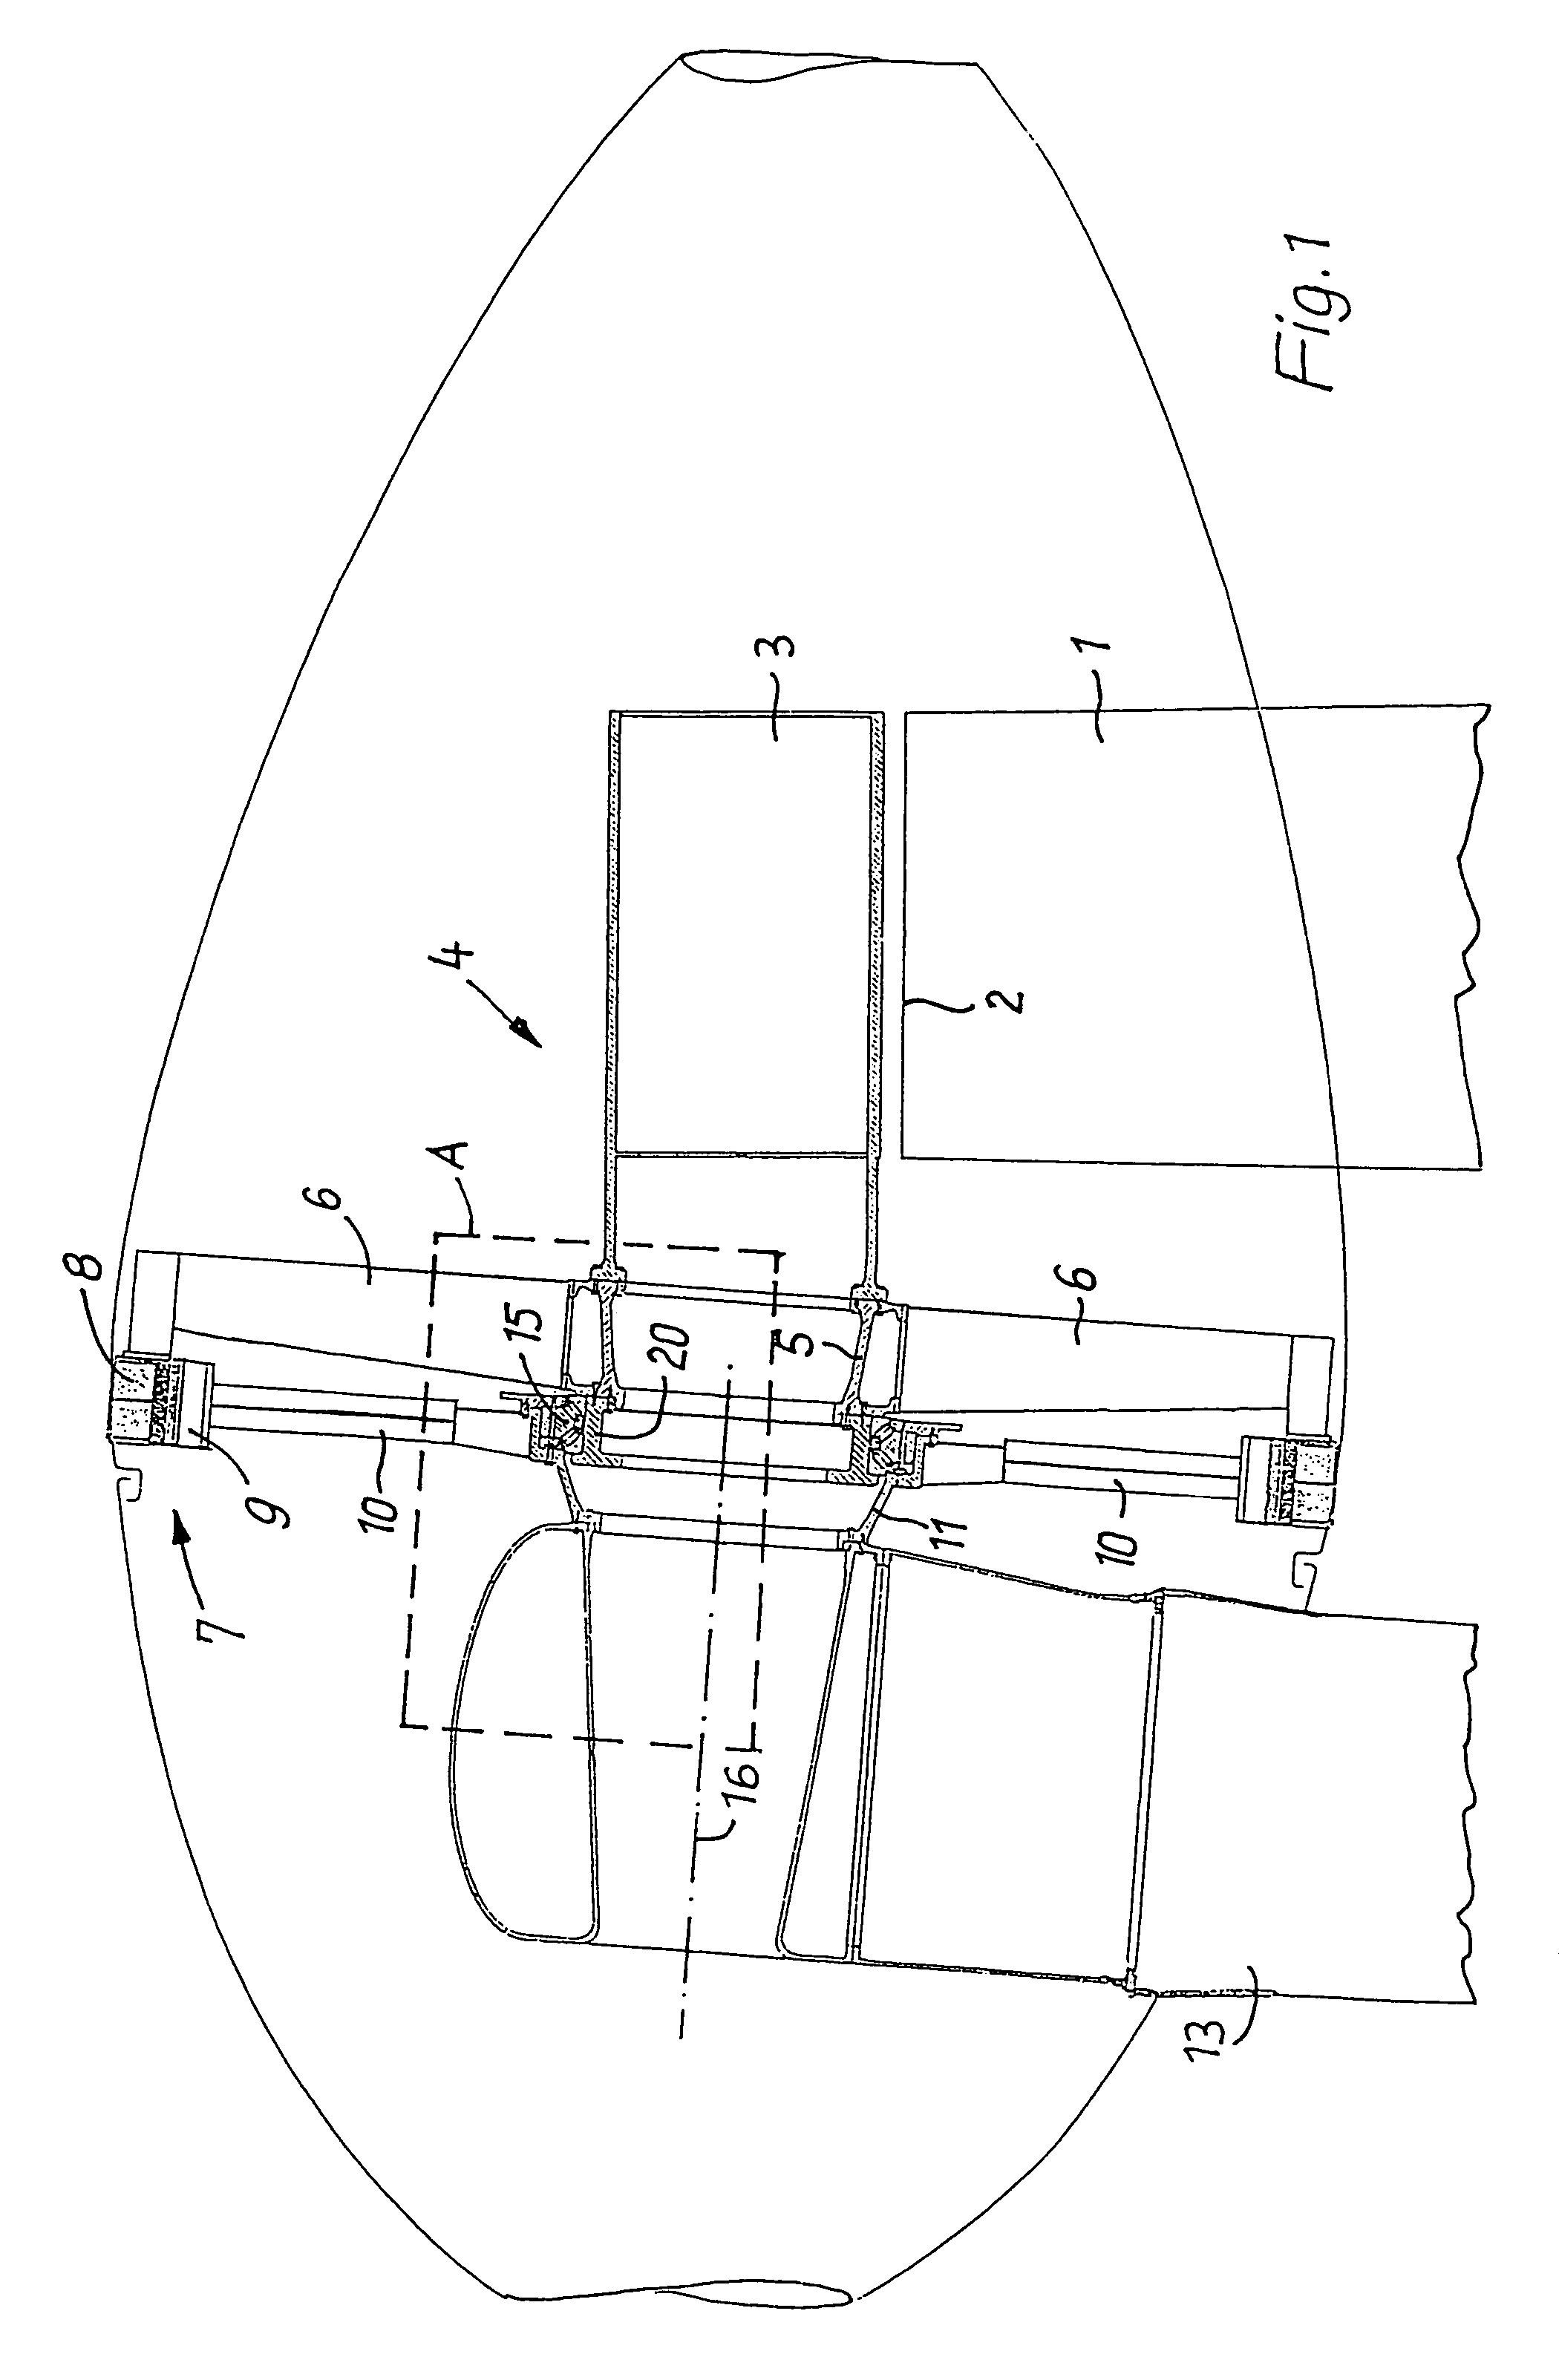 Wind energy unit comprising a hollow shaft for rotor hub and generator